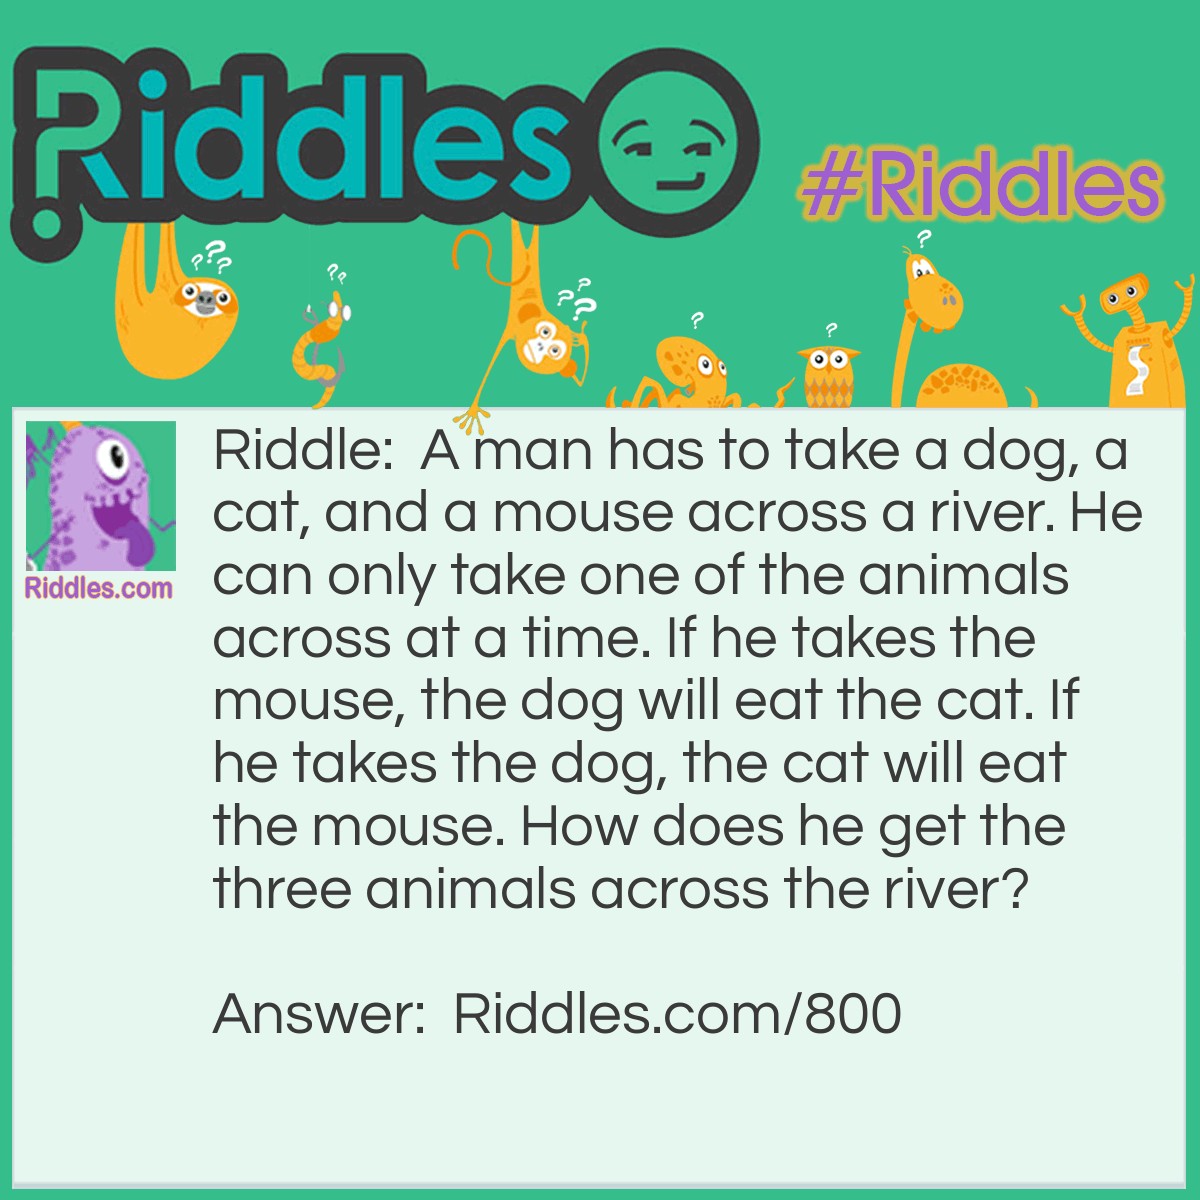 Riddle: A man has to take a dog, a cat, and a mouse across a river. He can only take one of the animals across at a time. If he takes the mouse, the dog will eat the cat. If he takes the dog, the cat will eat the mouse. How does he get the three animals across the river? Answer: 1. The man takes the cat across and goes back to get the mouse. 2. The man then takes the mouse across and returns with the cat. 3. The man leaves the cat on the shore and takes the dog across. He leaves the dog with the mouse. 4. The man goes back to get the cat and all of the animals have made it across the river!